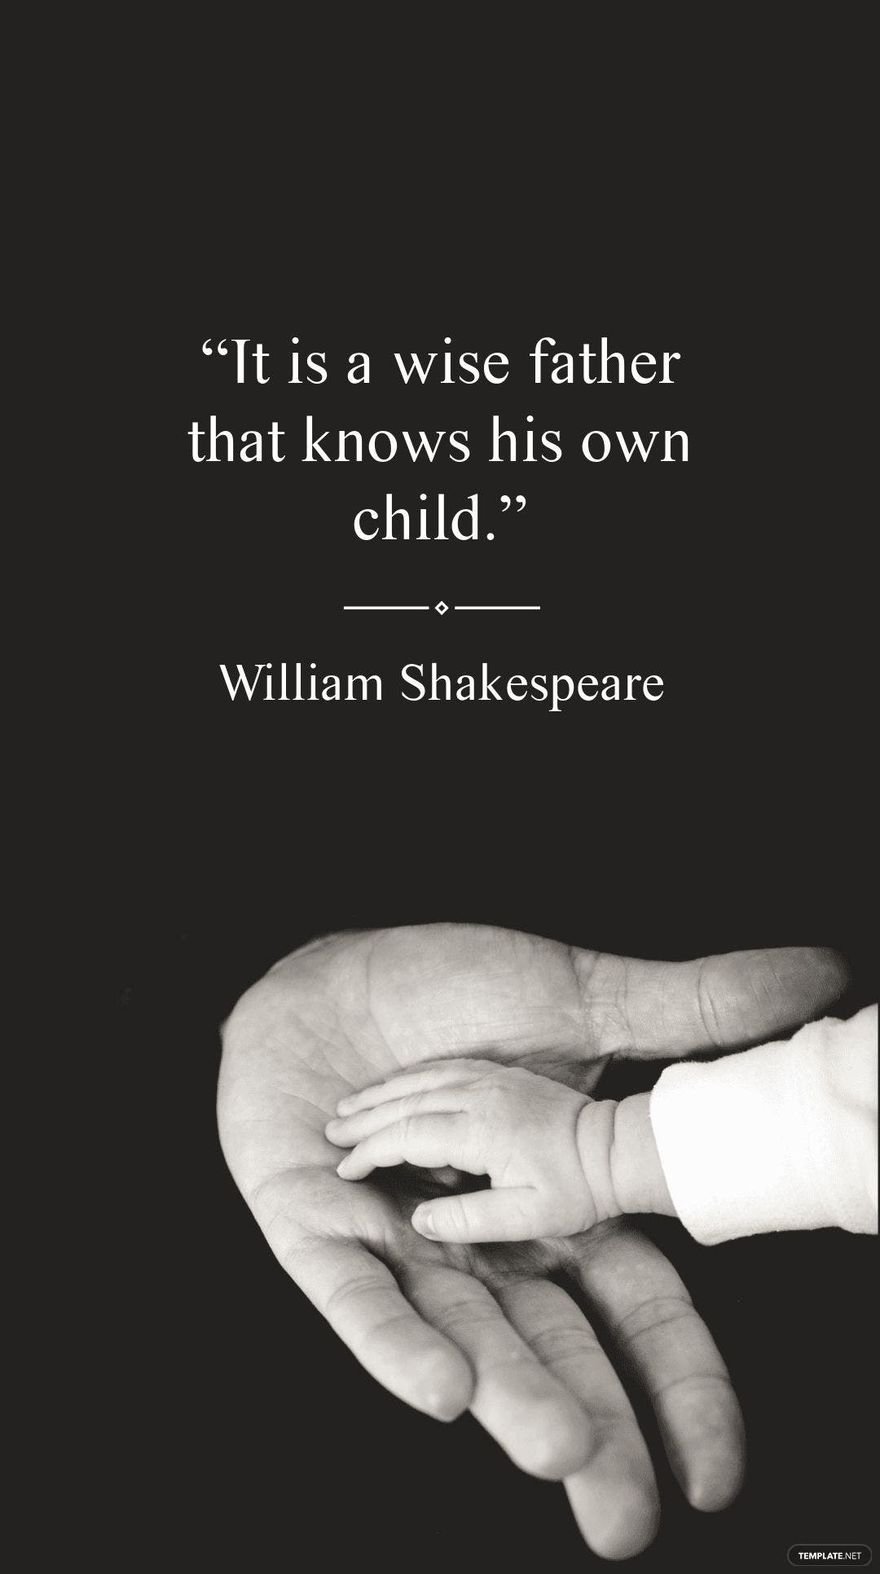 William Shakespeare - “It is a wise father that knows his own child.”